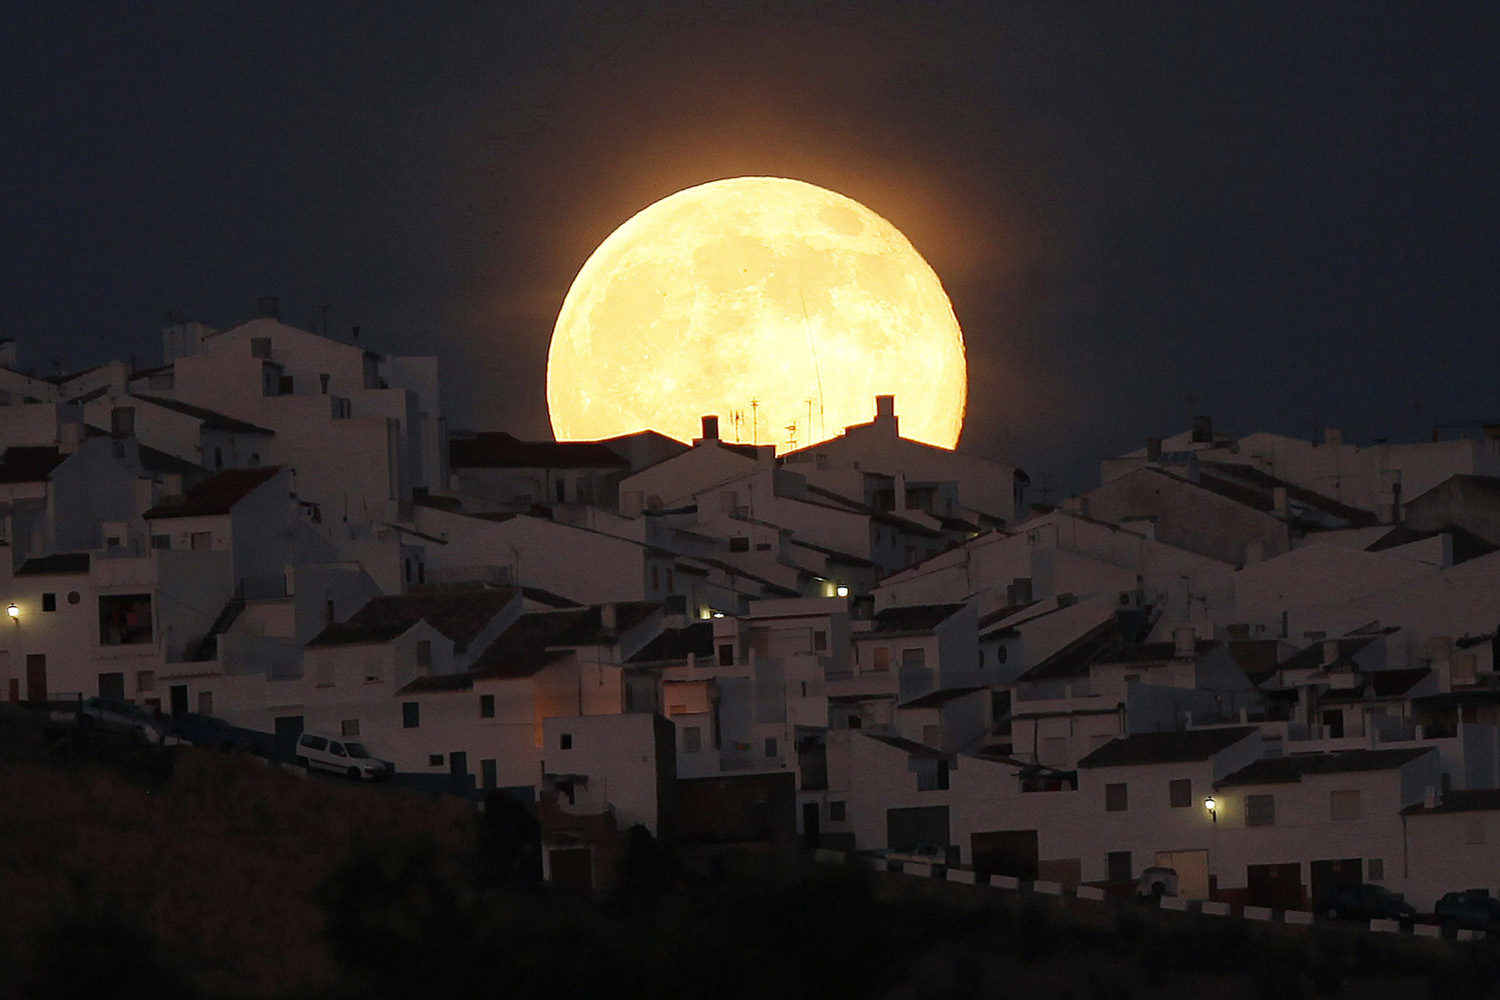 The Supermoon rises over houses in Olvera, Spain on July 12, 2014.